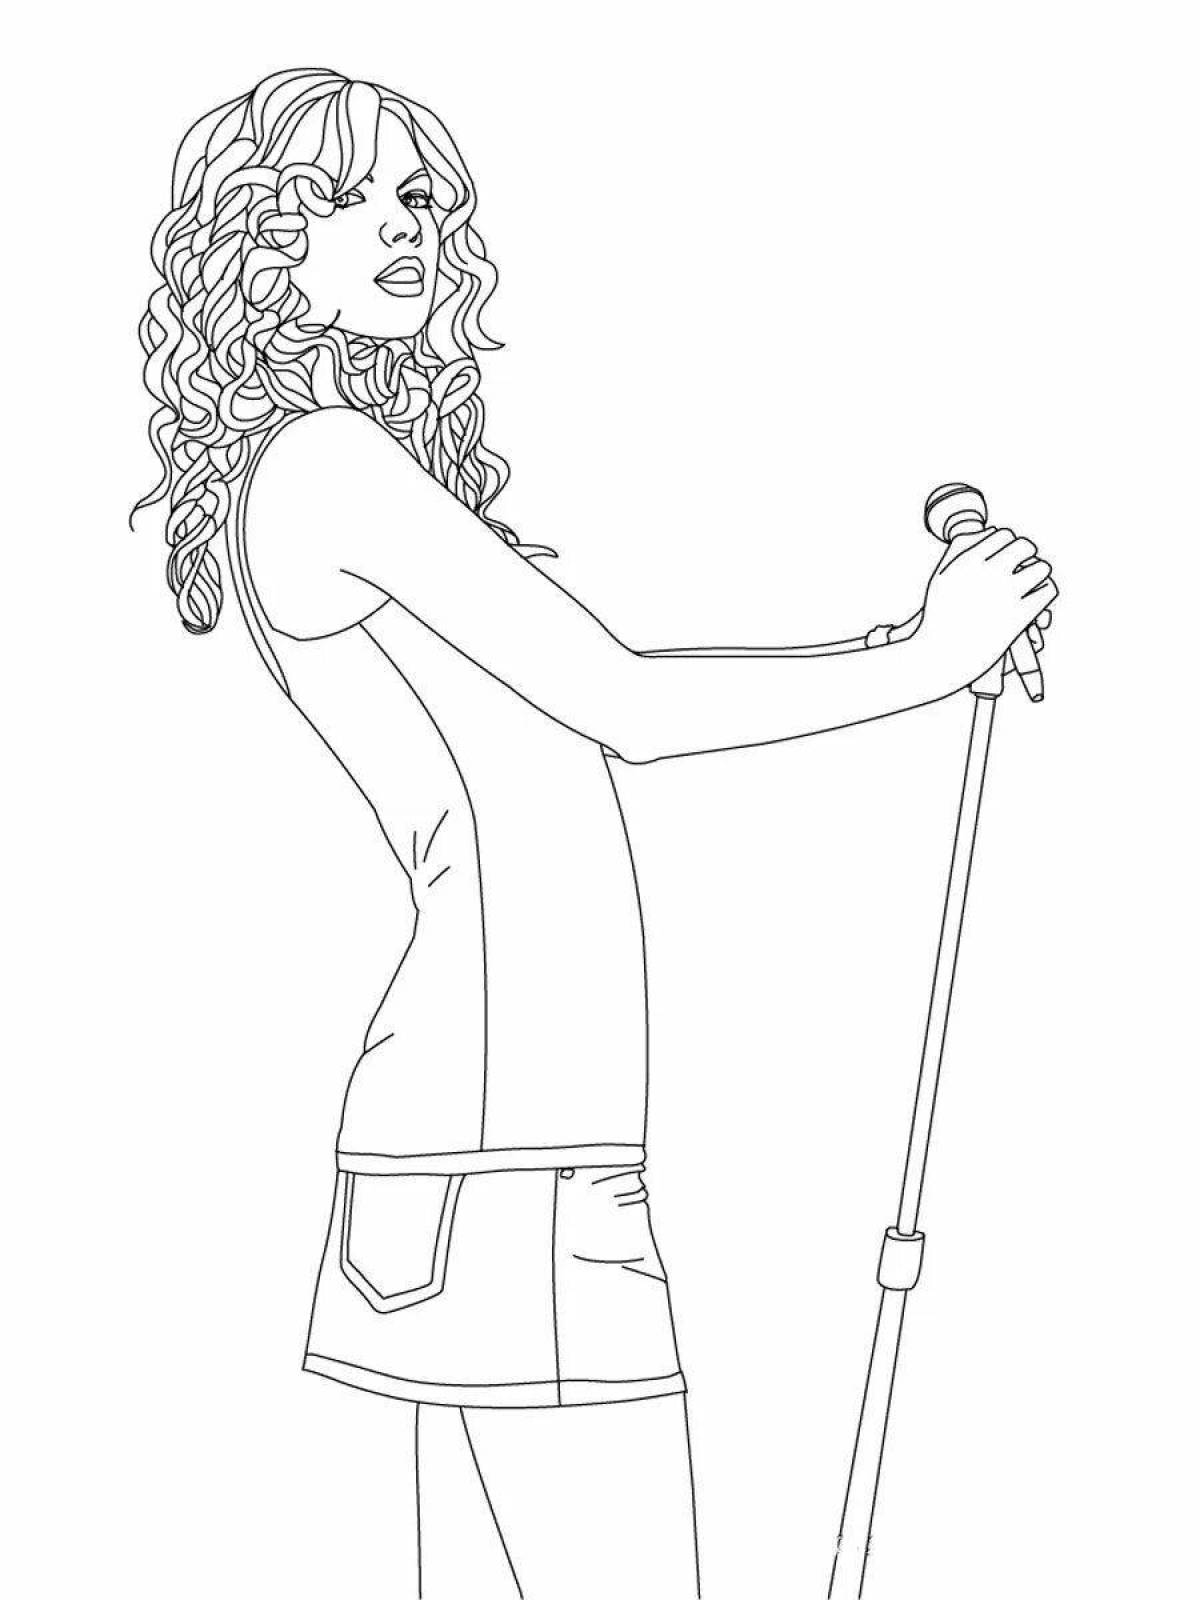 Animated coloring book singer for children